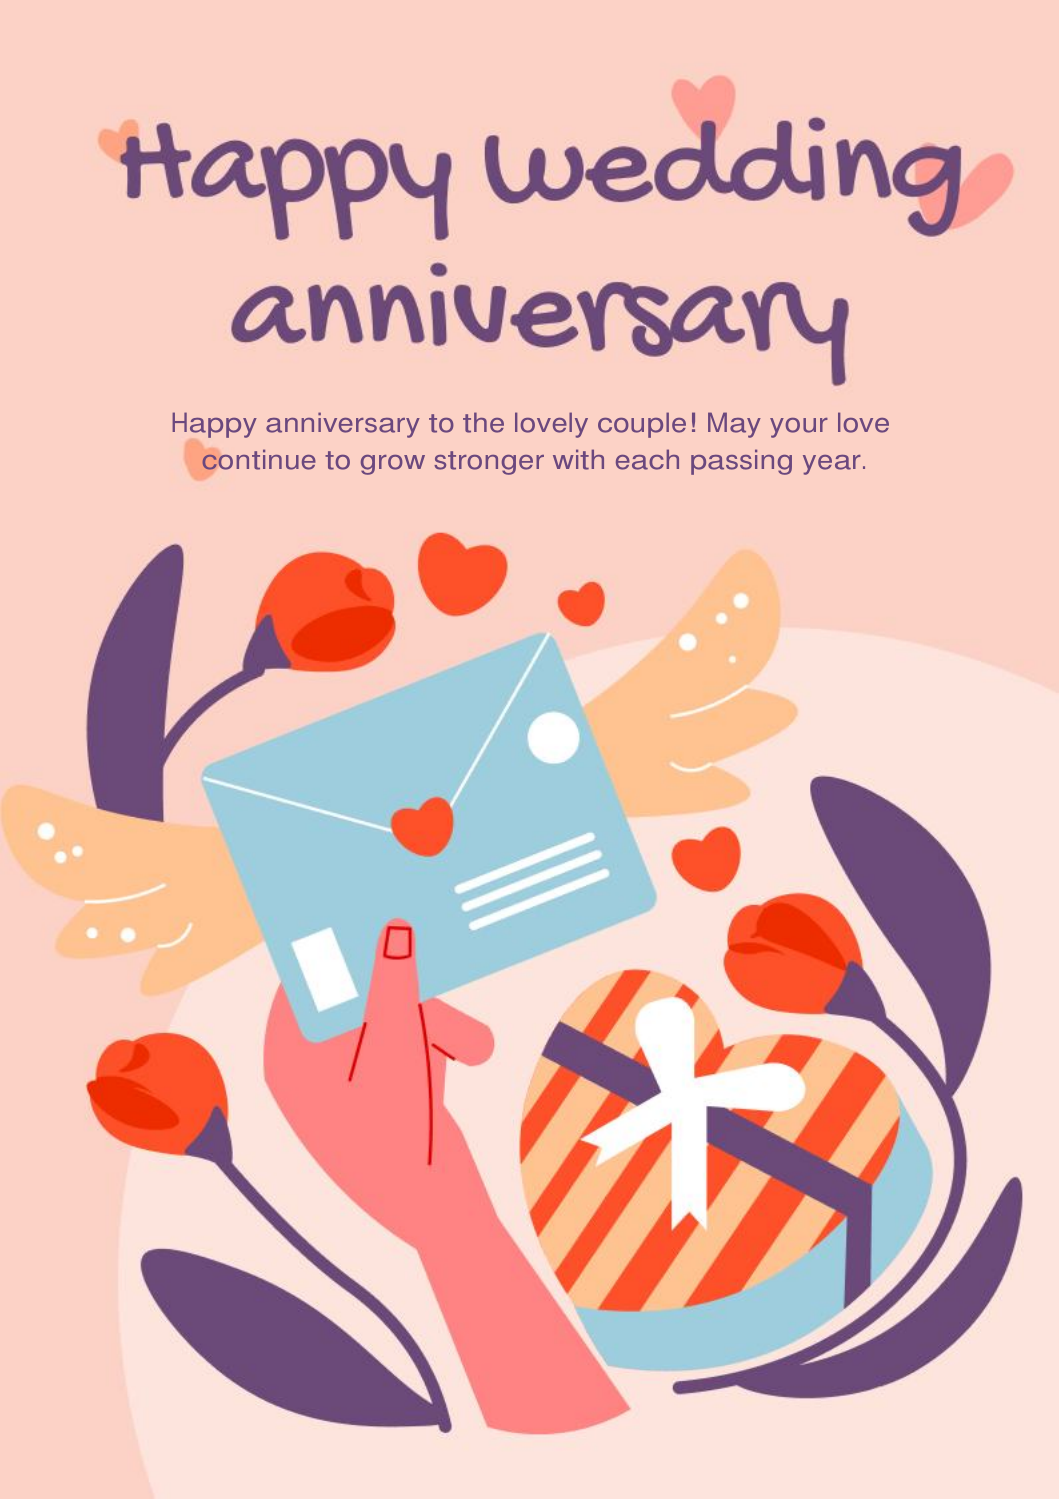 70 Anniversary Wishes for Husband: Quotes and Messages to Write